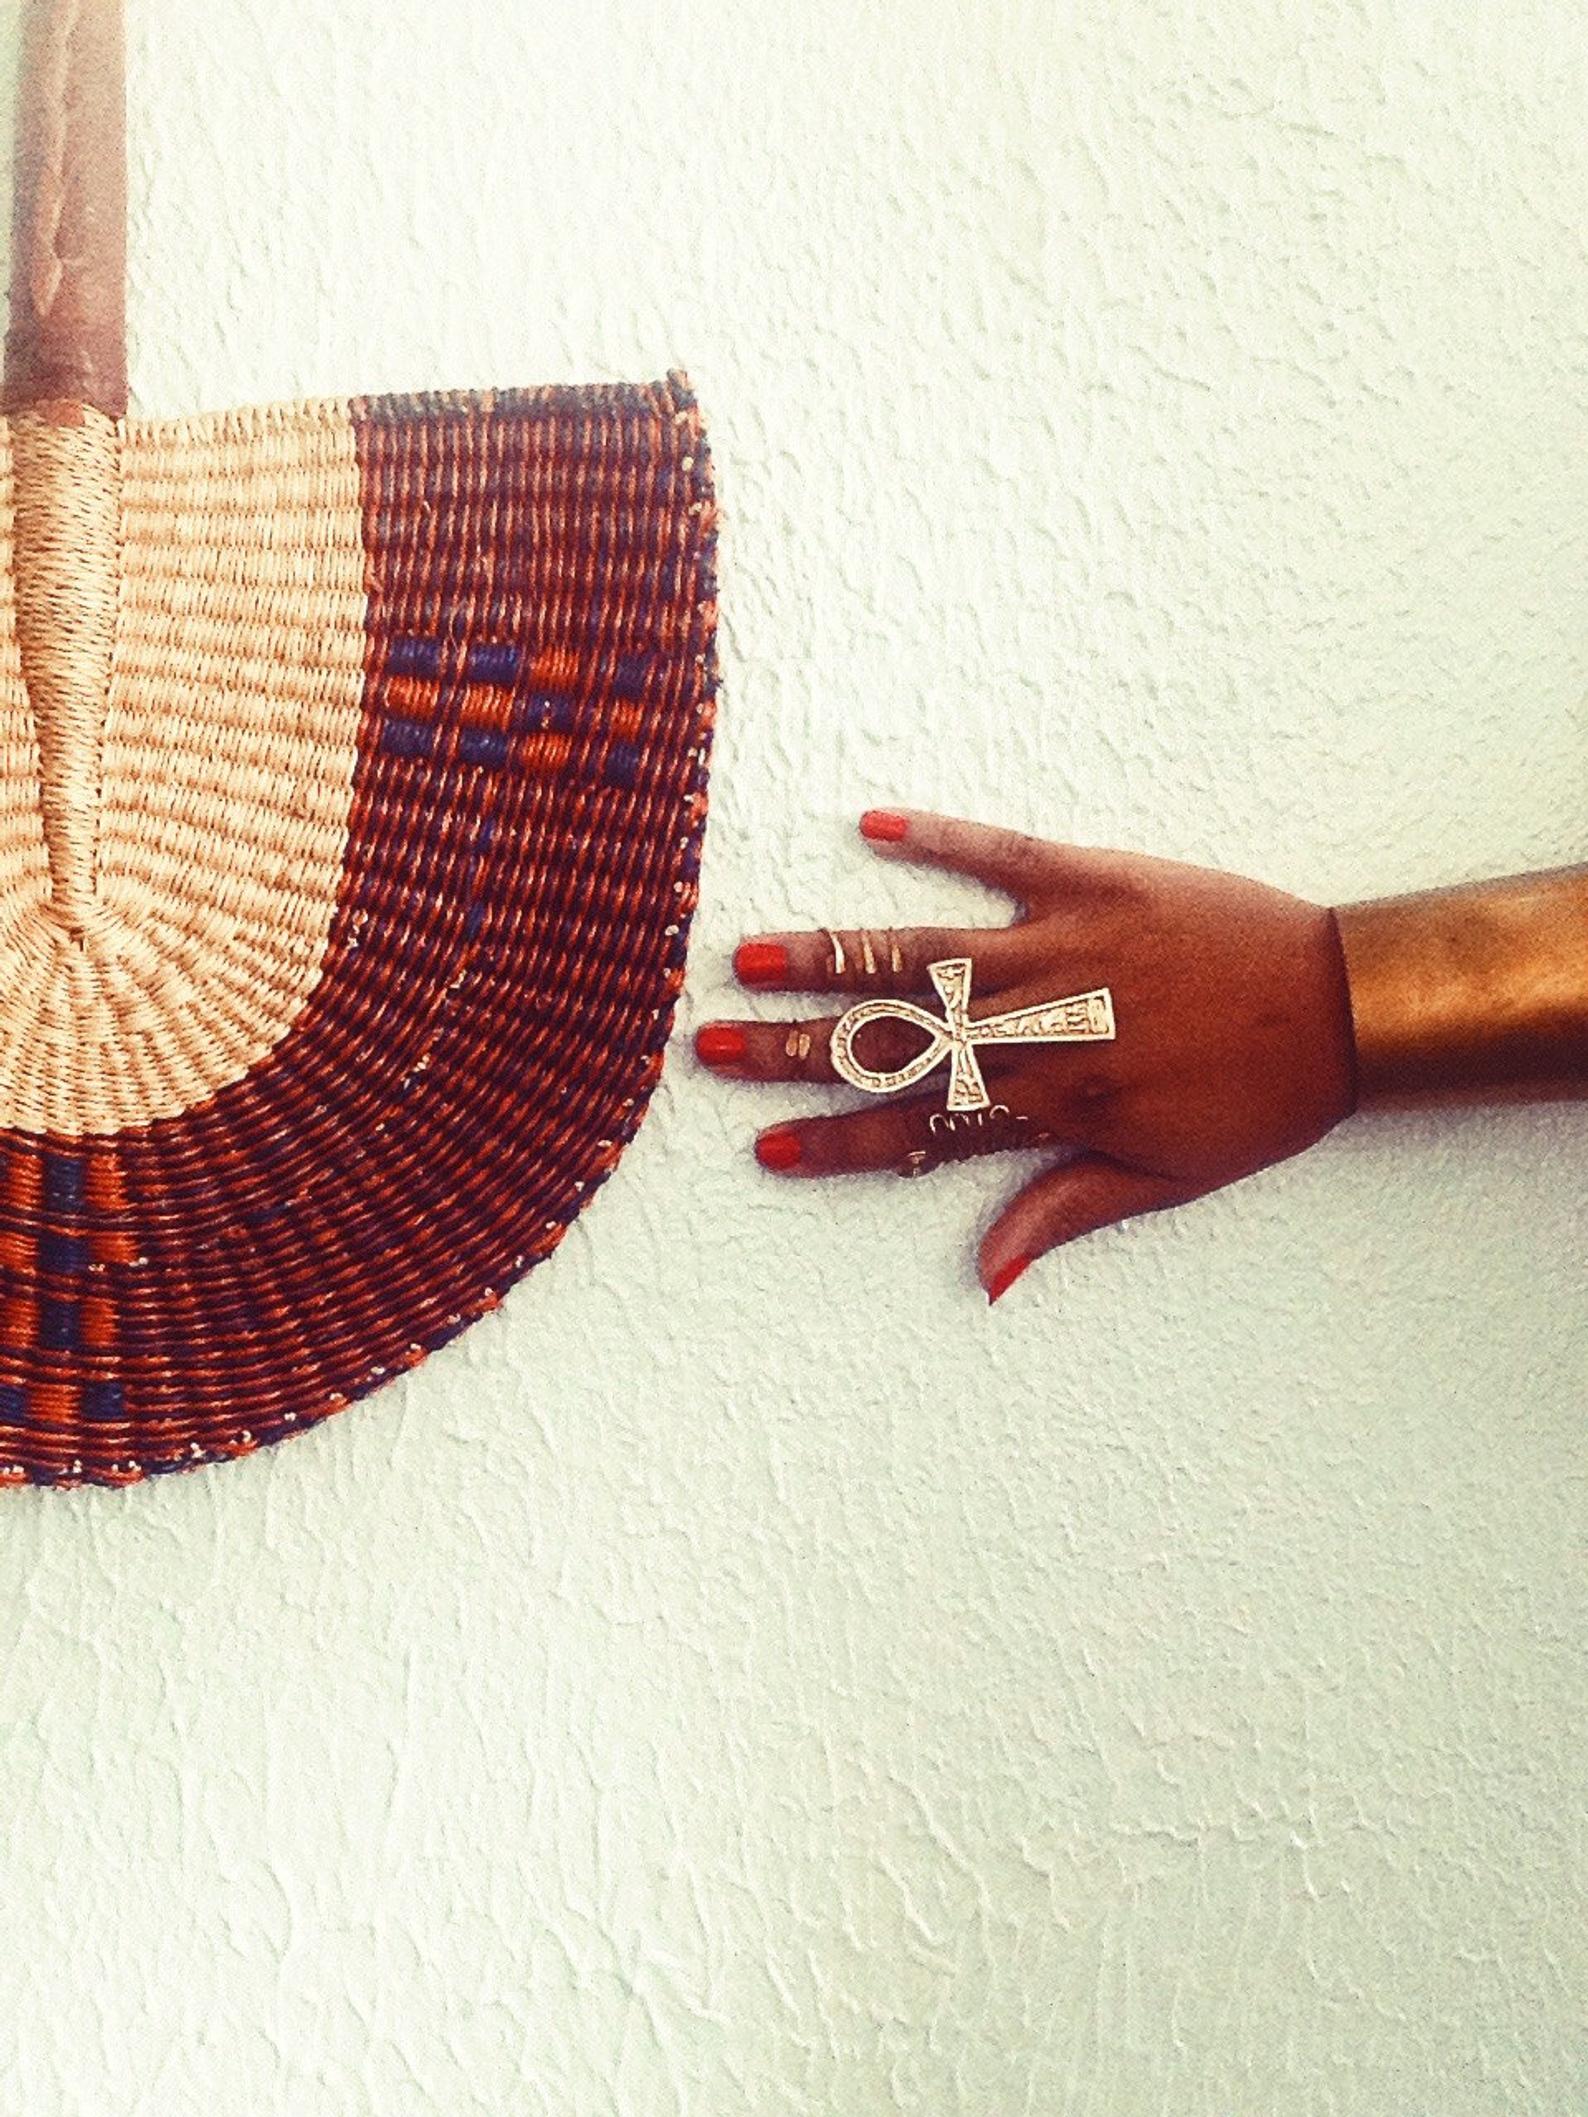 I’m Stepping My Jewelry Game Up With These Etsy Finds by Black Women